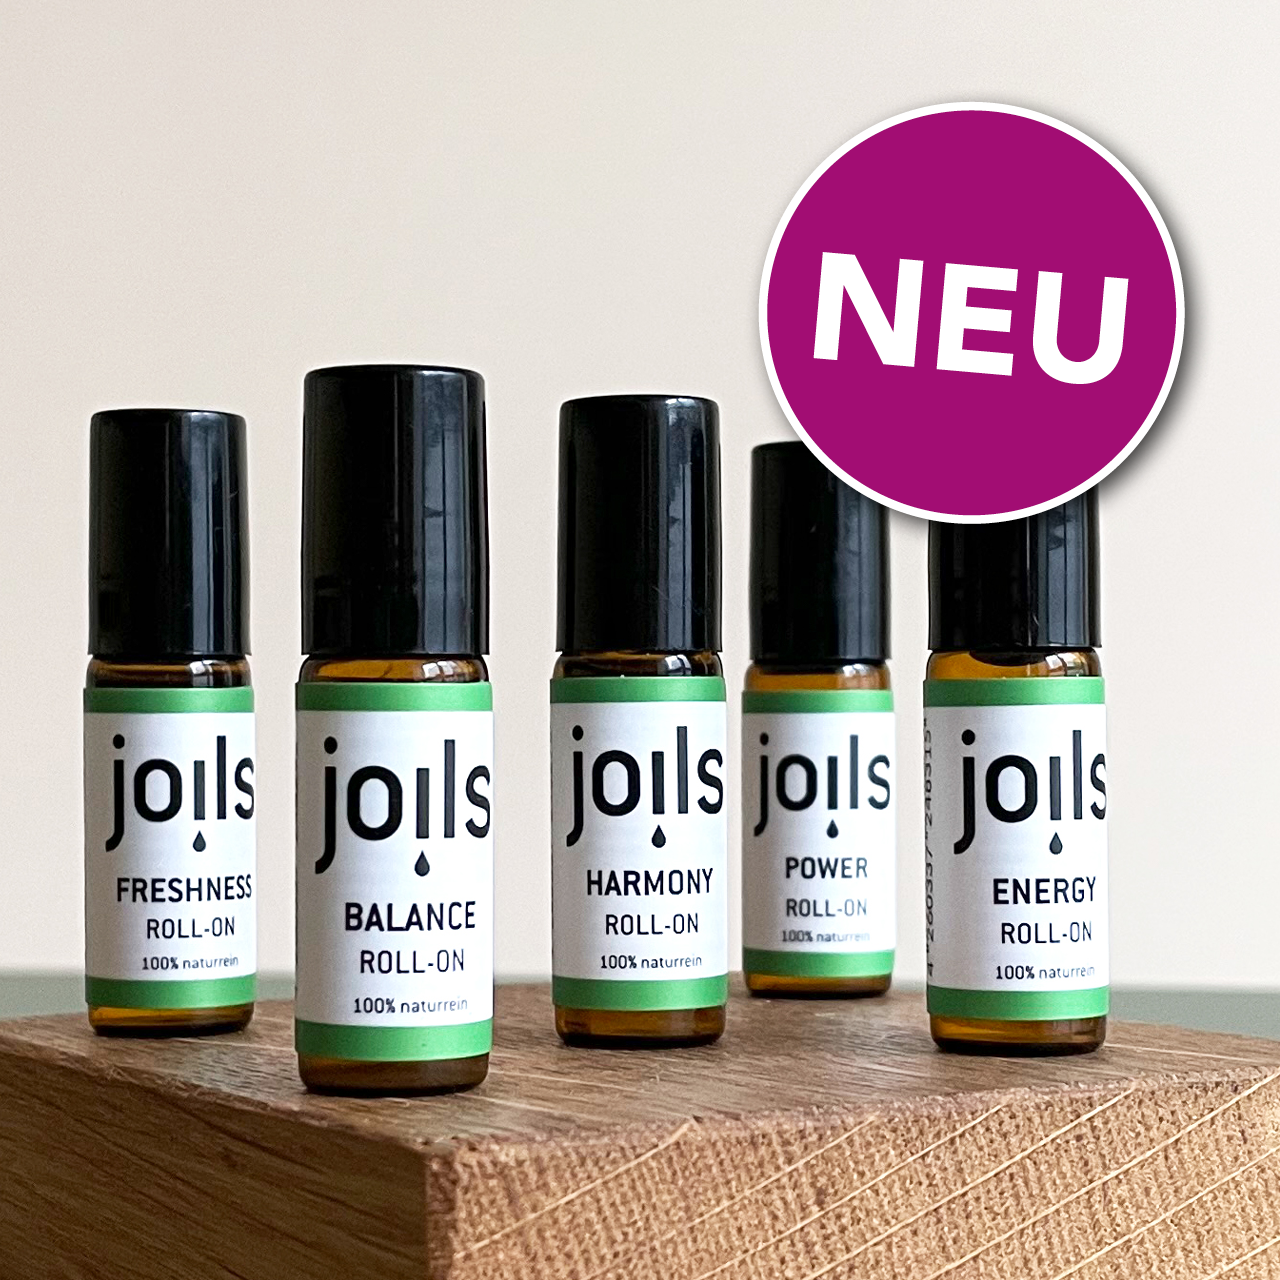 joils aroma roll ons duftroller